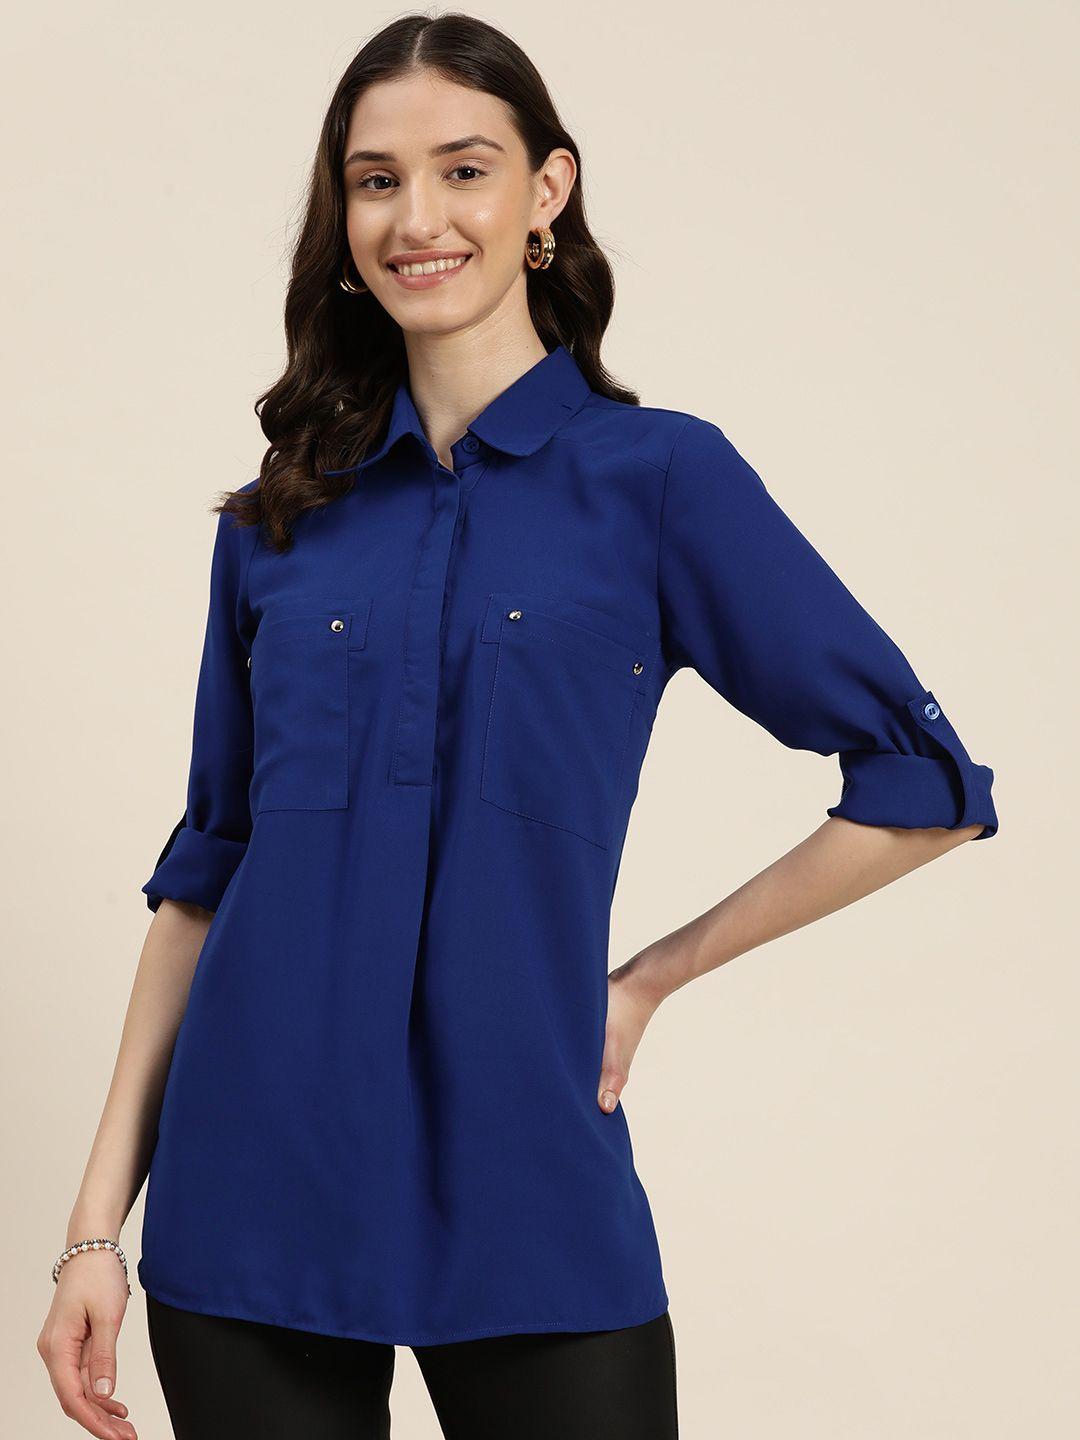 qurvii women comfort roll-up sleeves casual shirt